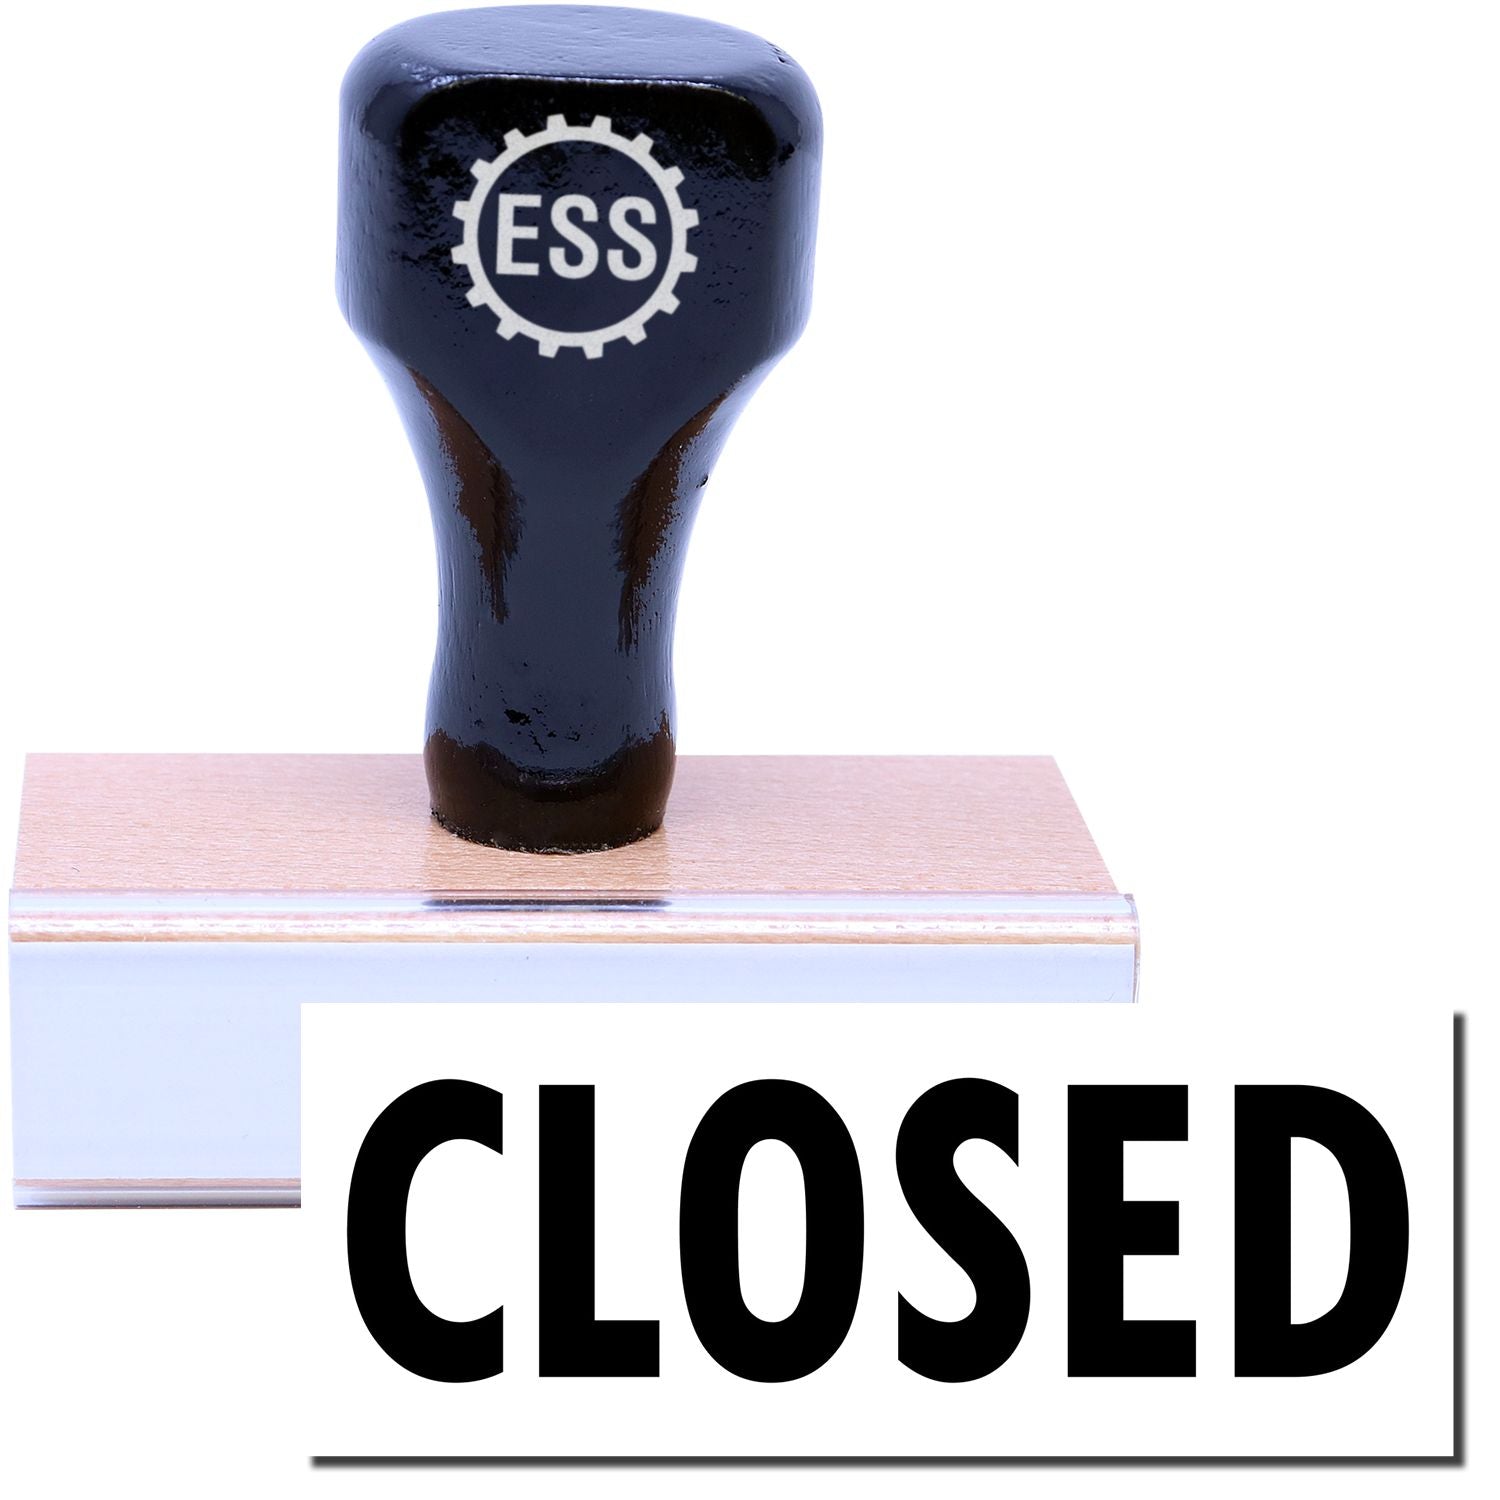 A stock office rubber stamp with a stamped image showing how the text "CLOSED" is displayed after stamping.